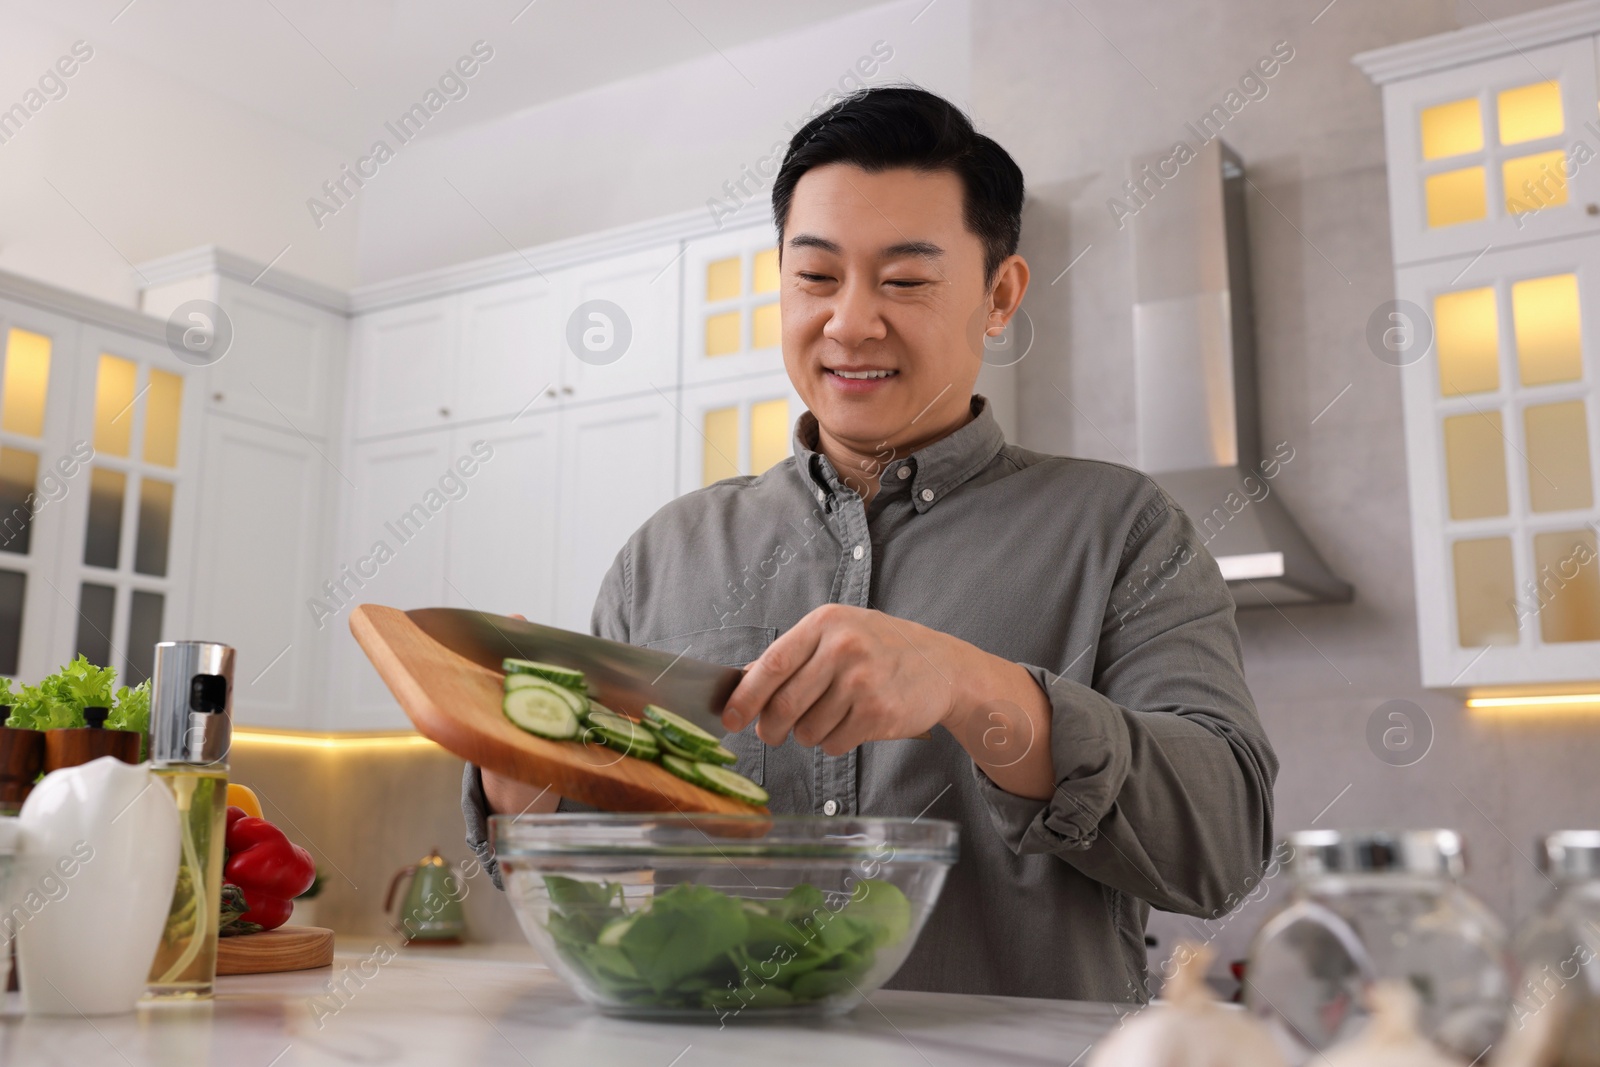 Photo of Cooking process. Man adding cut cucumber into bowl in kitchen, low angle view